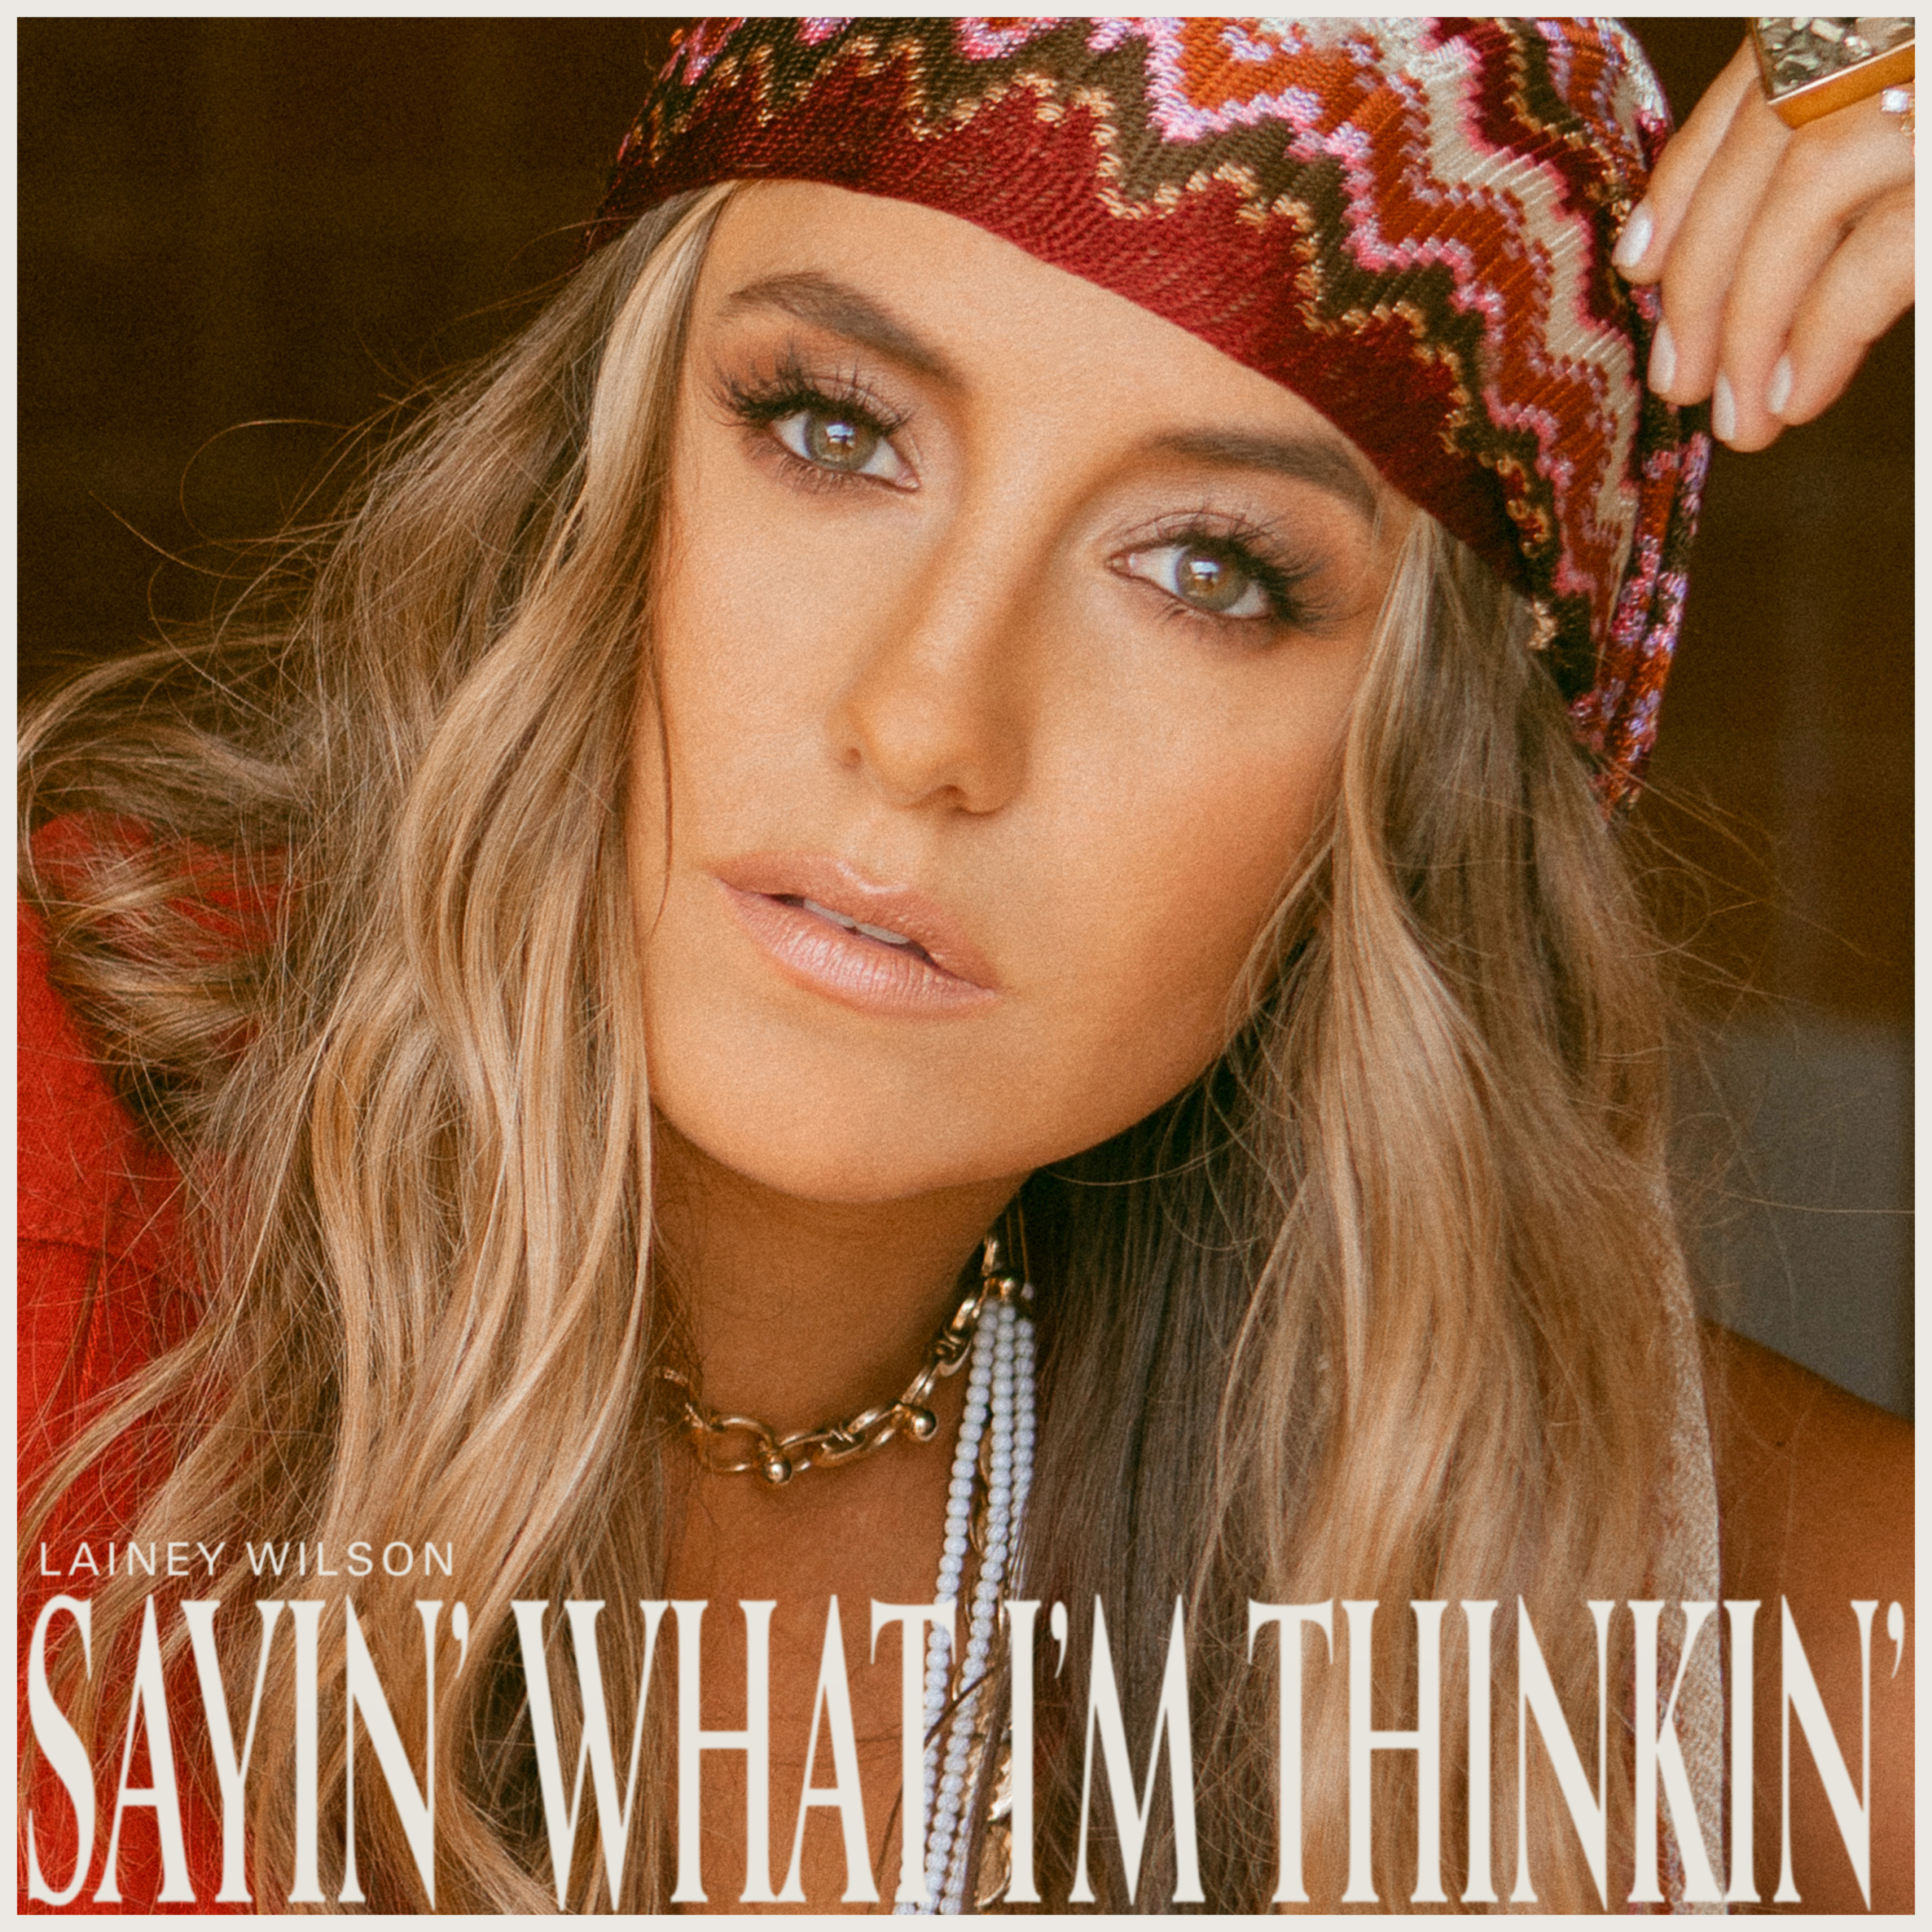 Lainey Wilson’s New Album "Sayin' What I'm Thinkin'" is due out February 19th